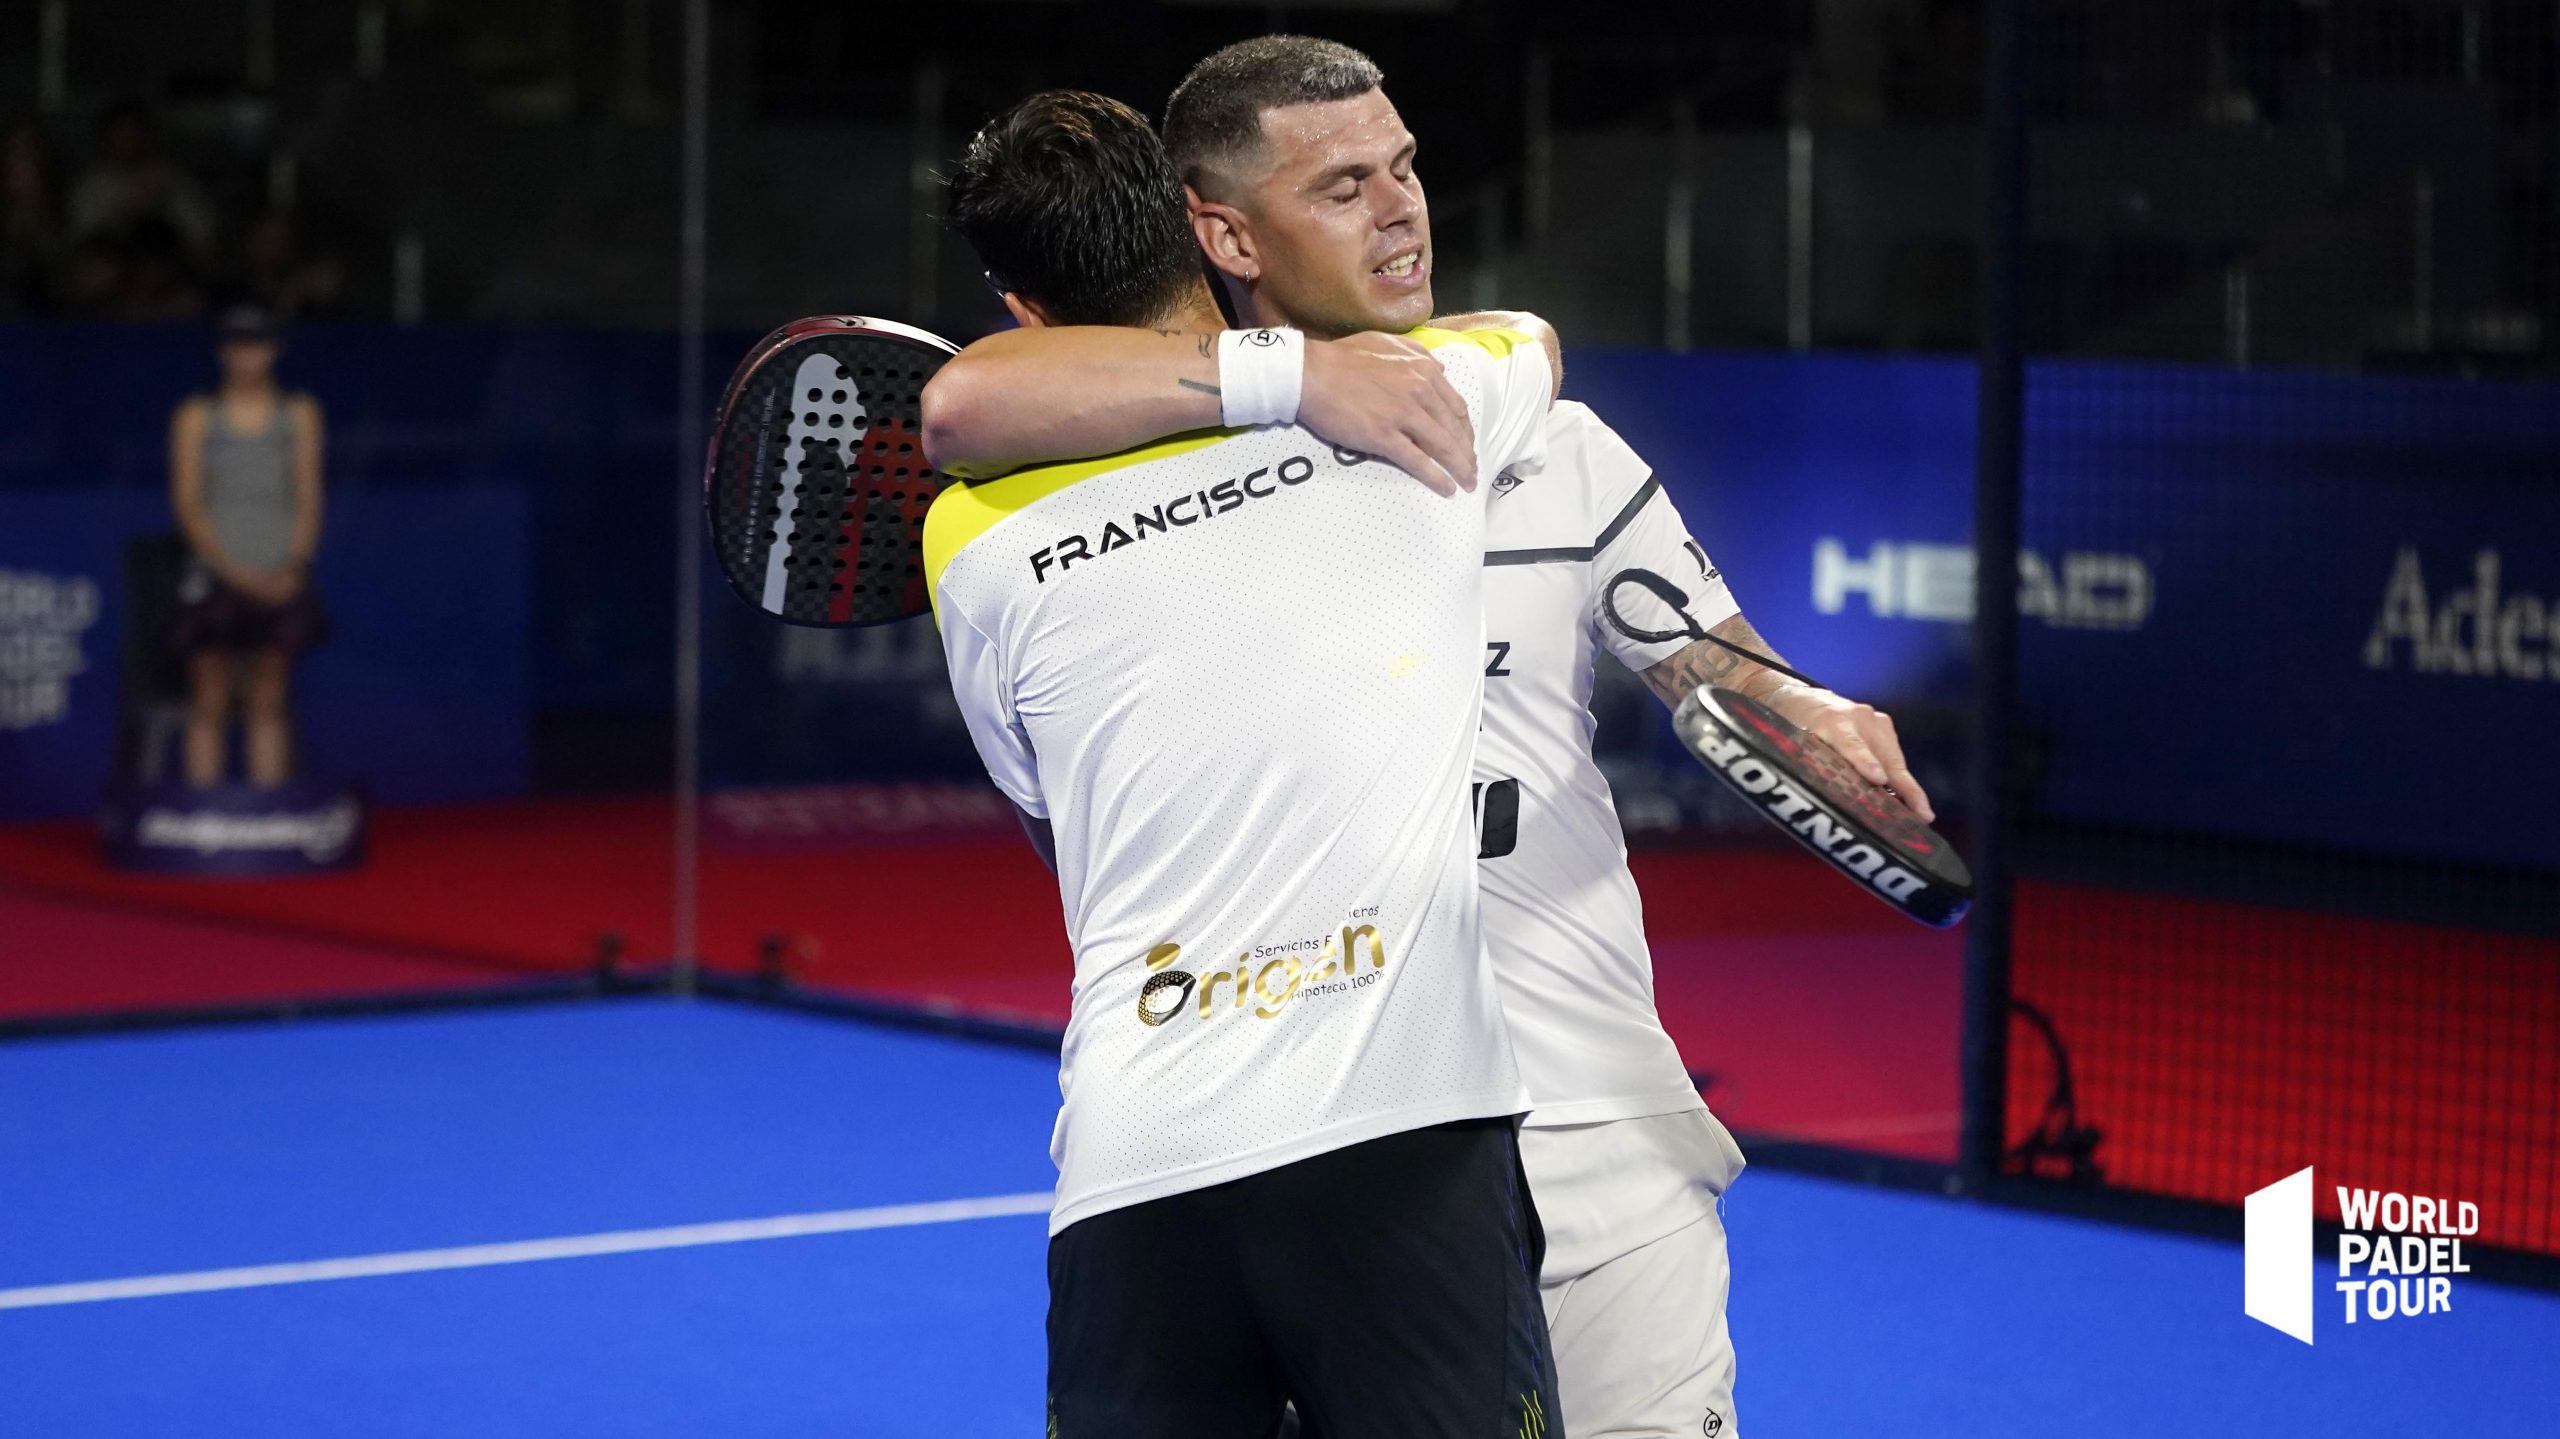 Madrid Master shock: Tapia and Gutiérrez OUT in round of 32!